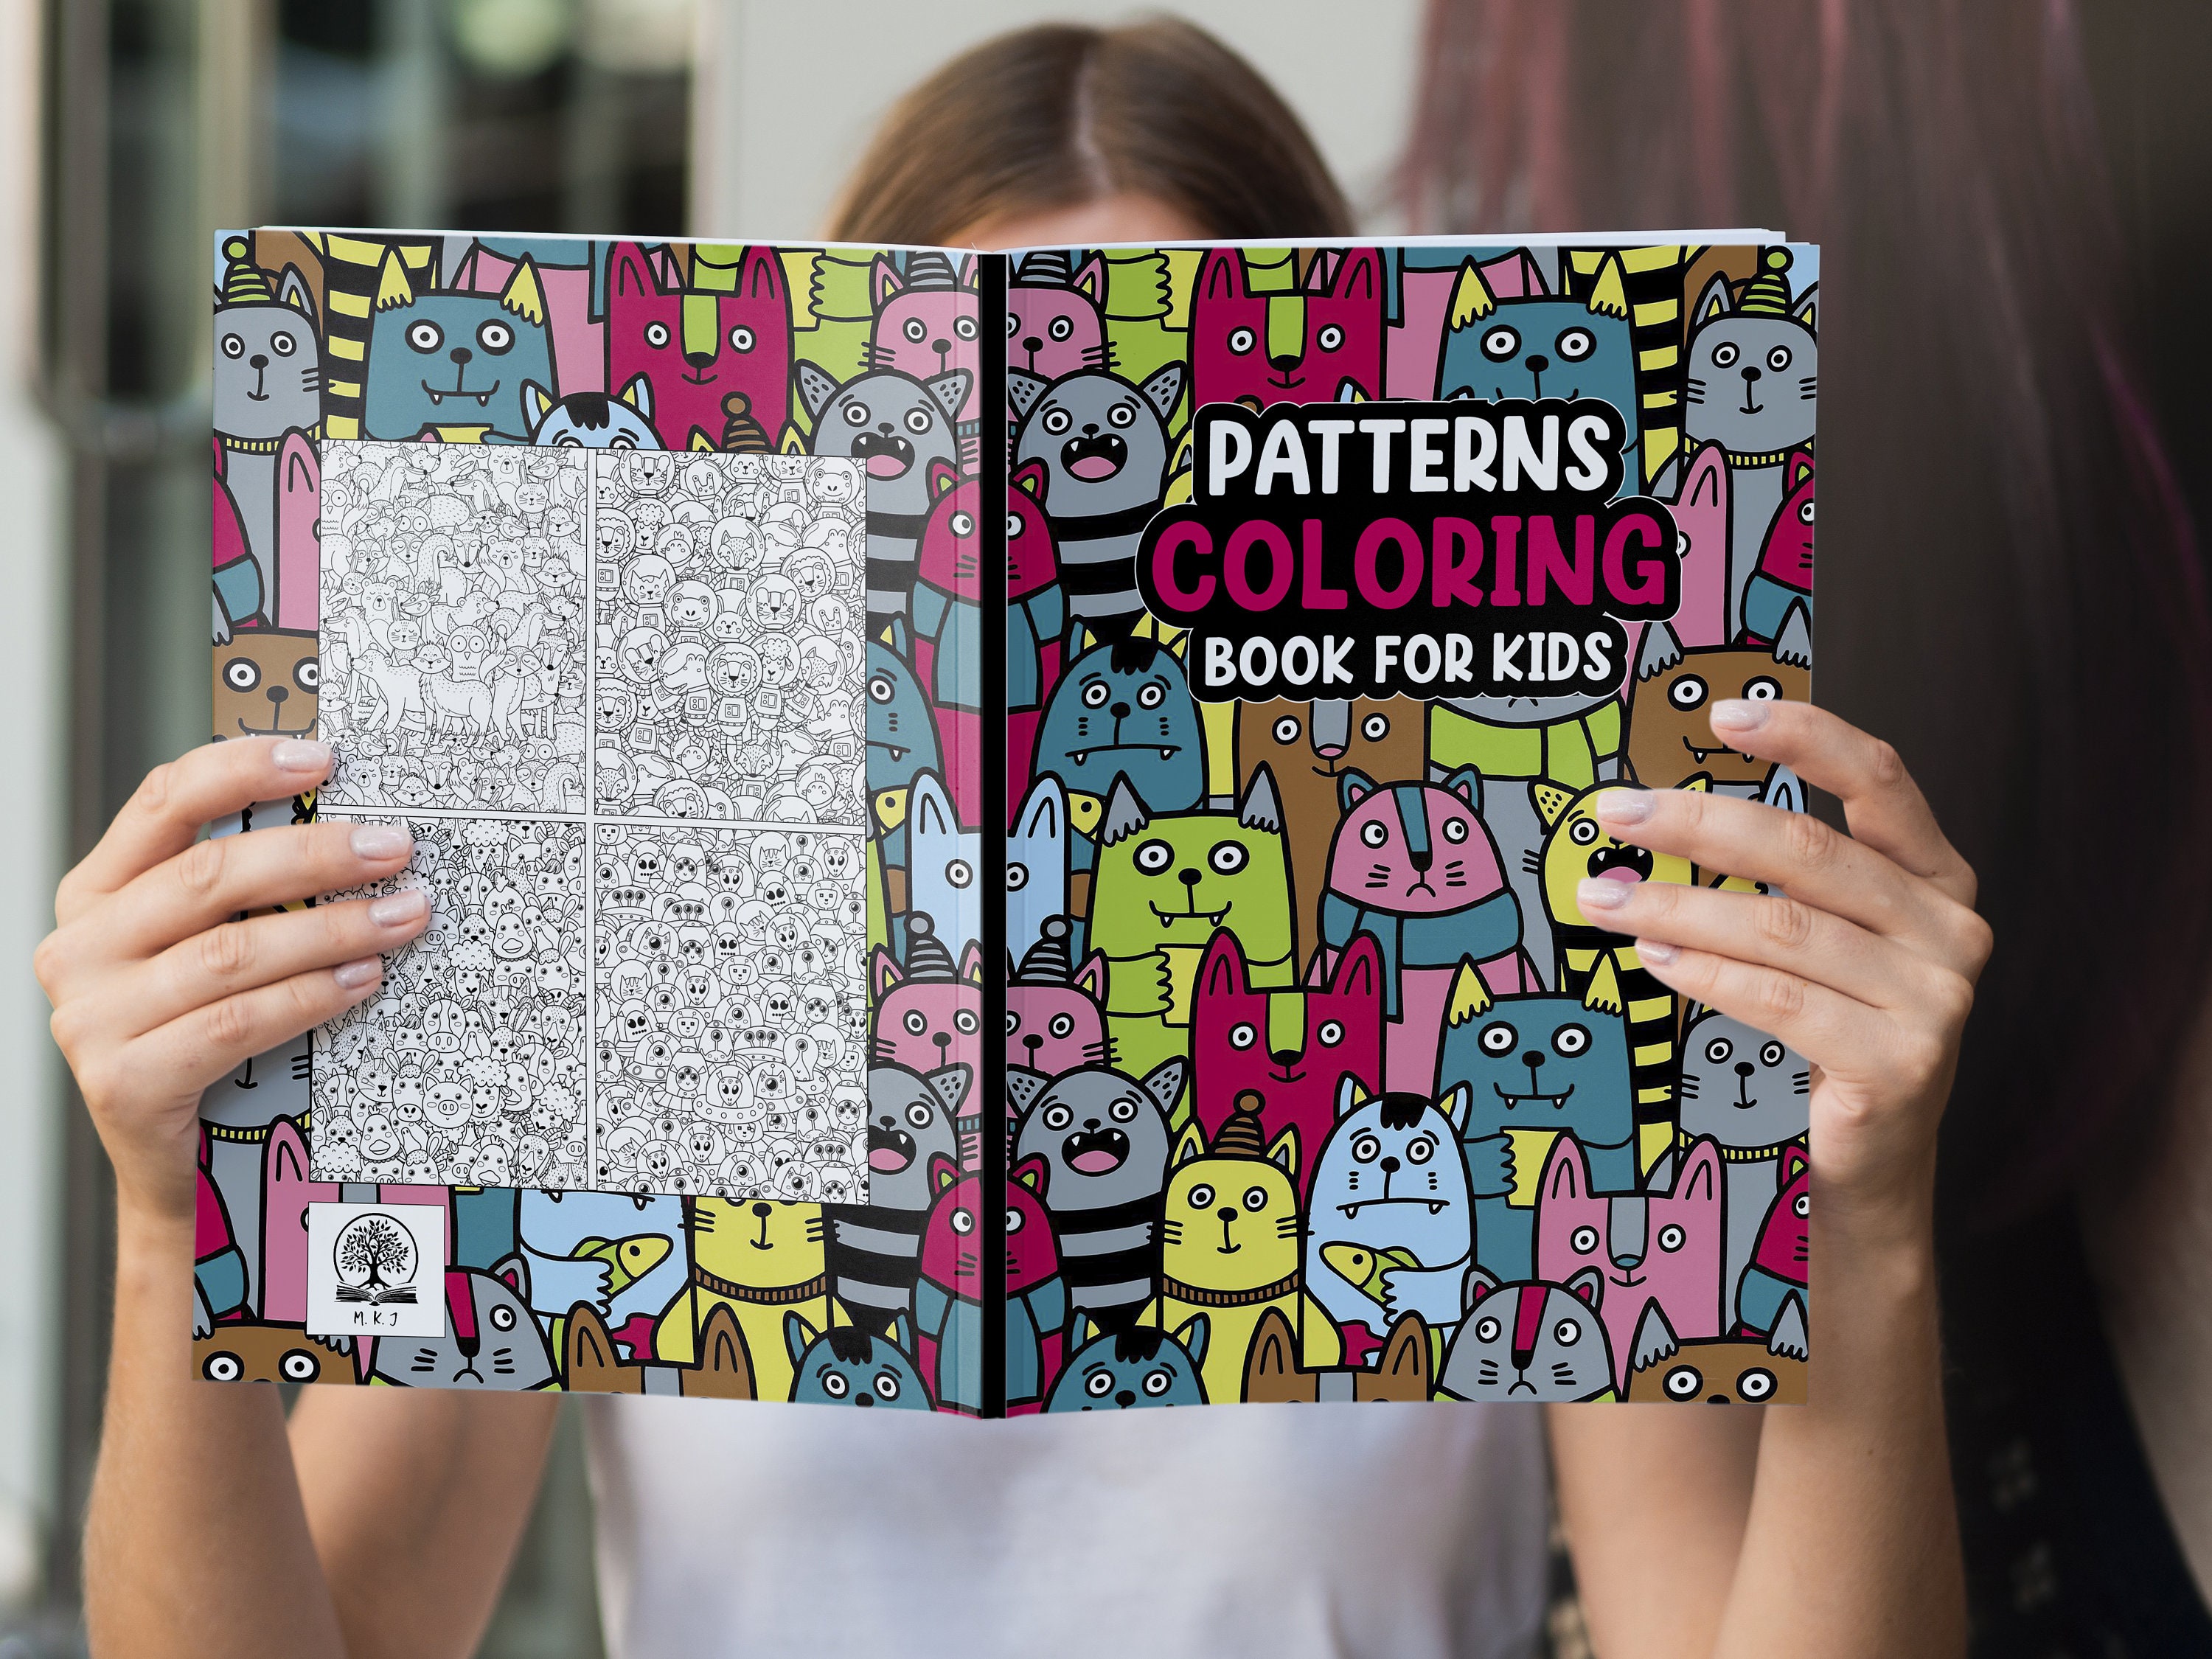 Playful Patterns Coloring Book: For Kids Ages 6-8, 9-12 [Book]